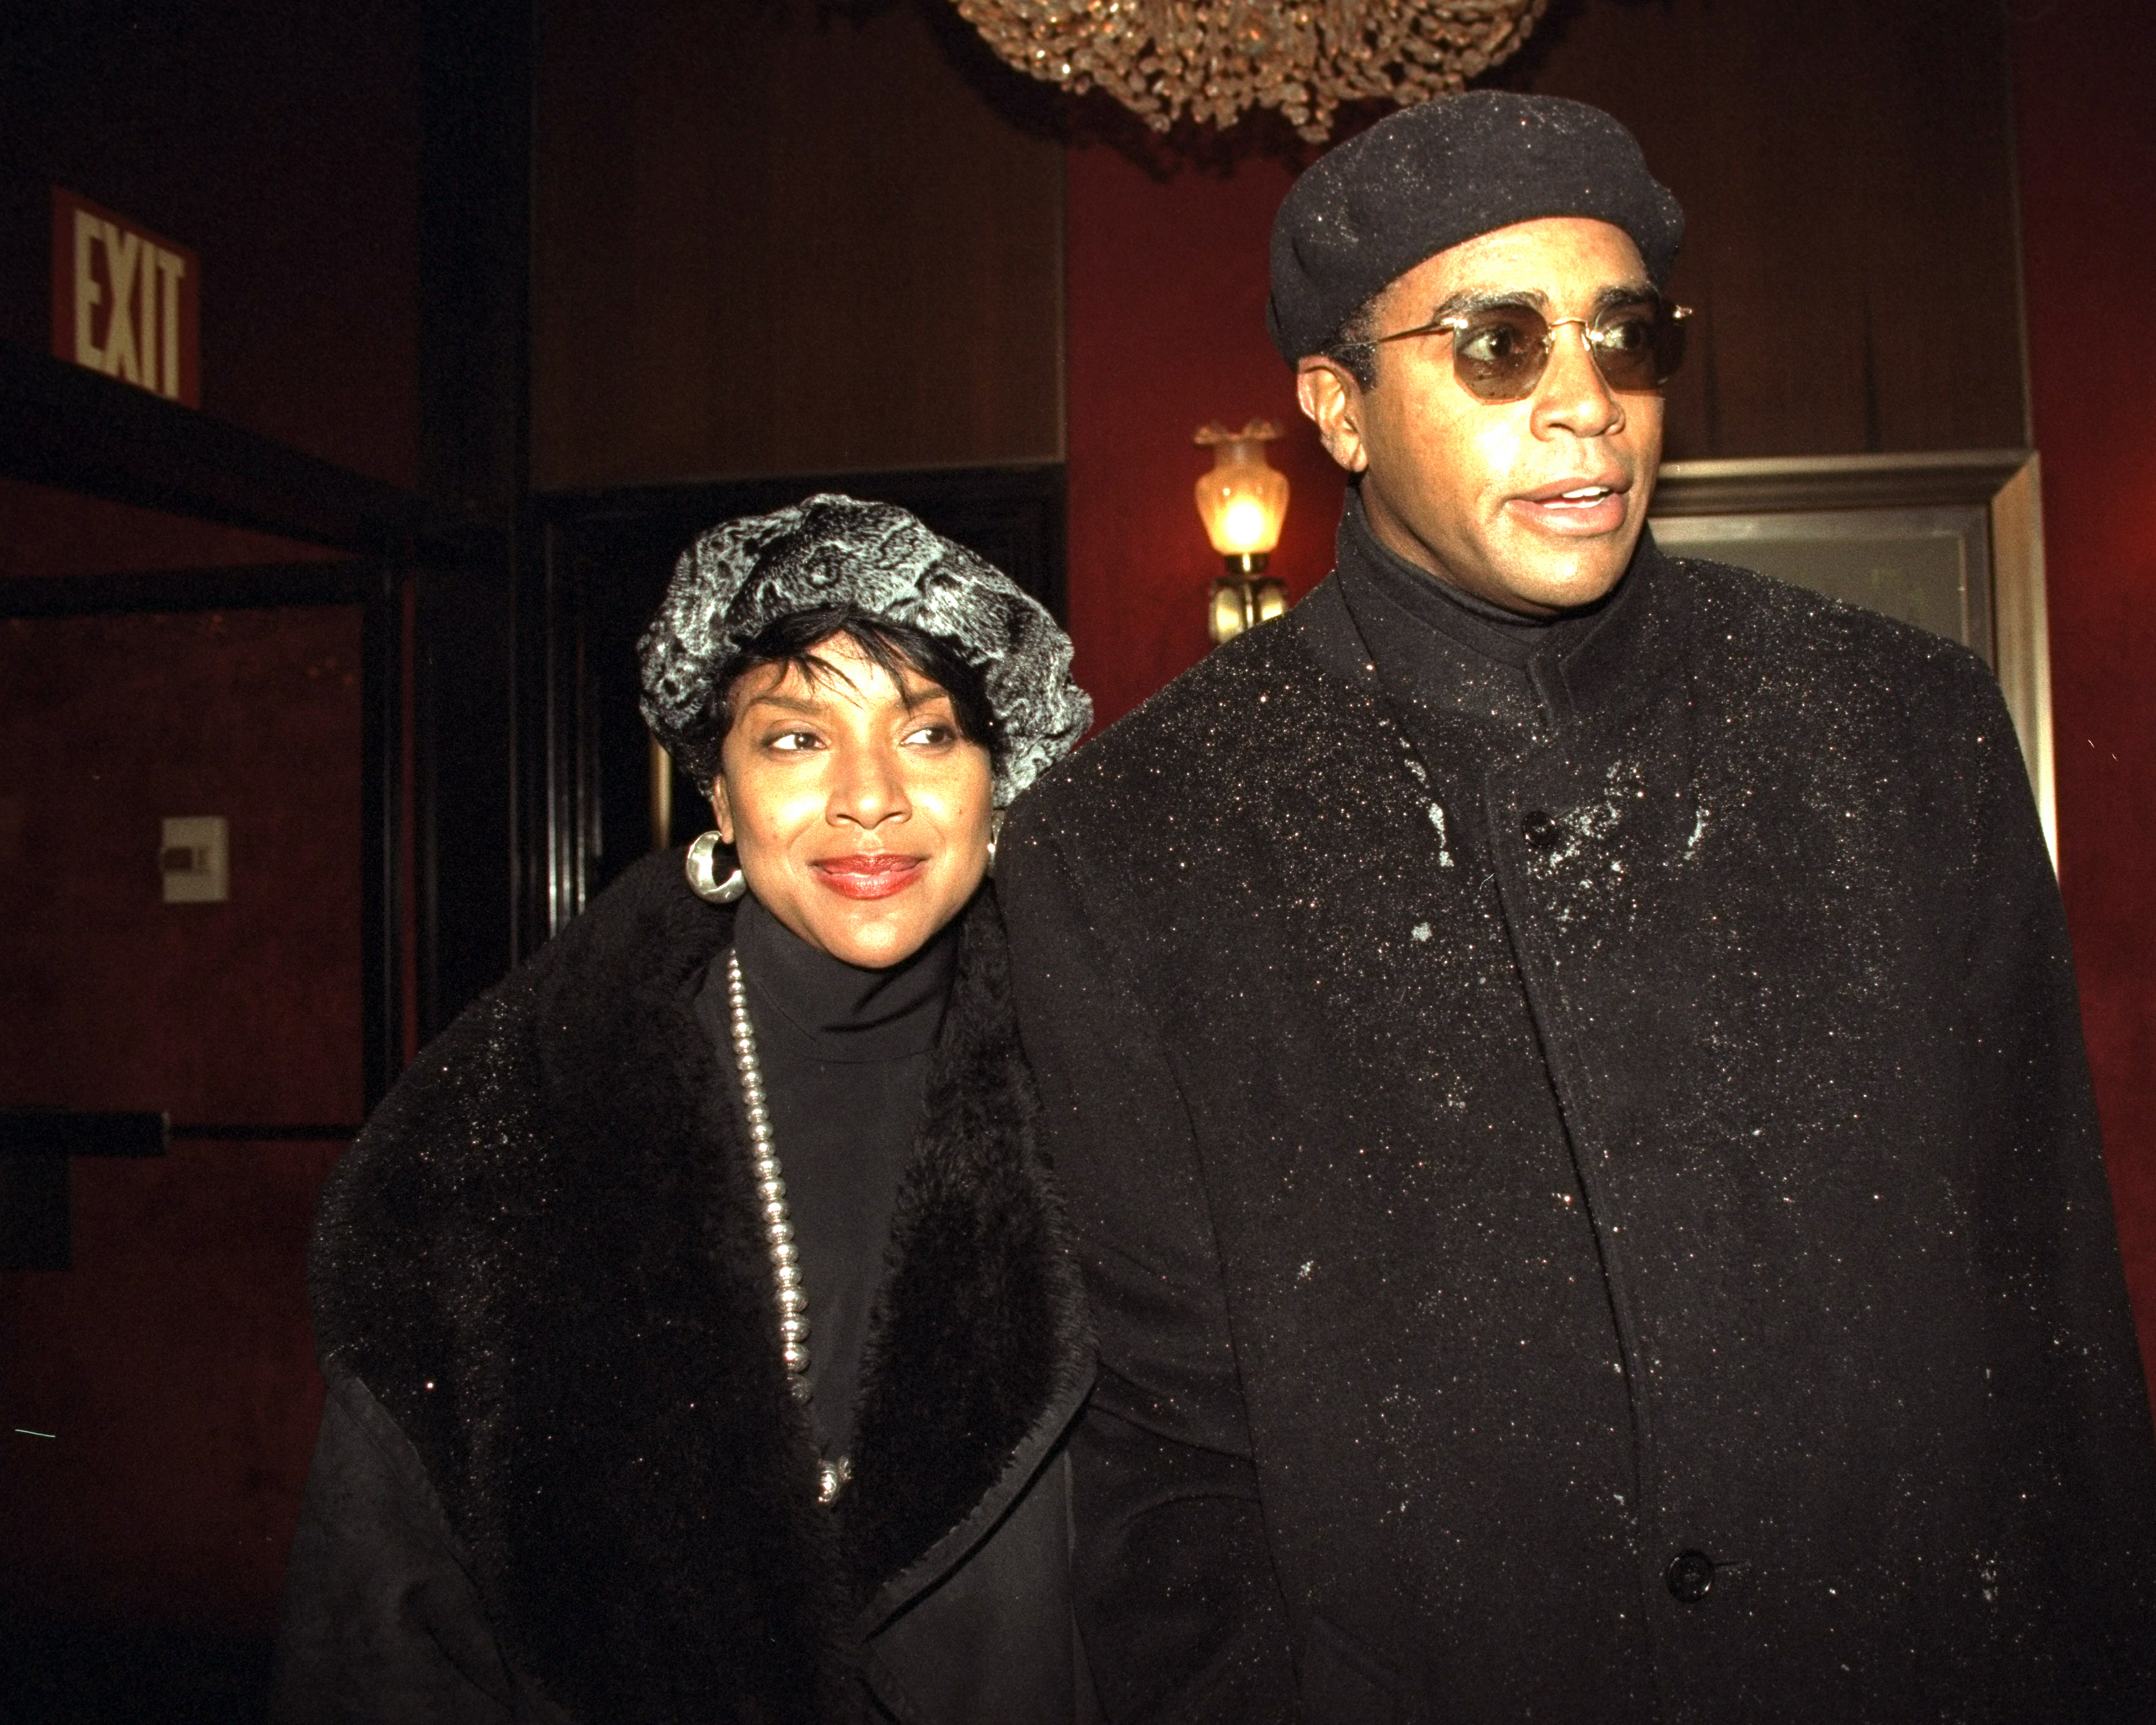 Ahmad Rashad and Phylicia Rashad attend the premiere of the film "Waiting to Exhale" in December 1995 at Ziegfeld Theater. | Source: Getty Images